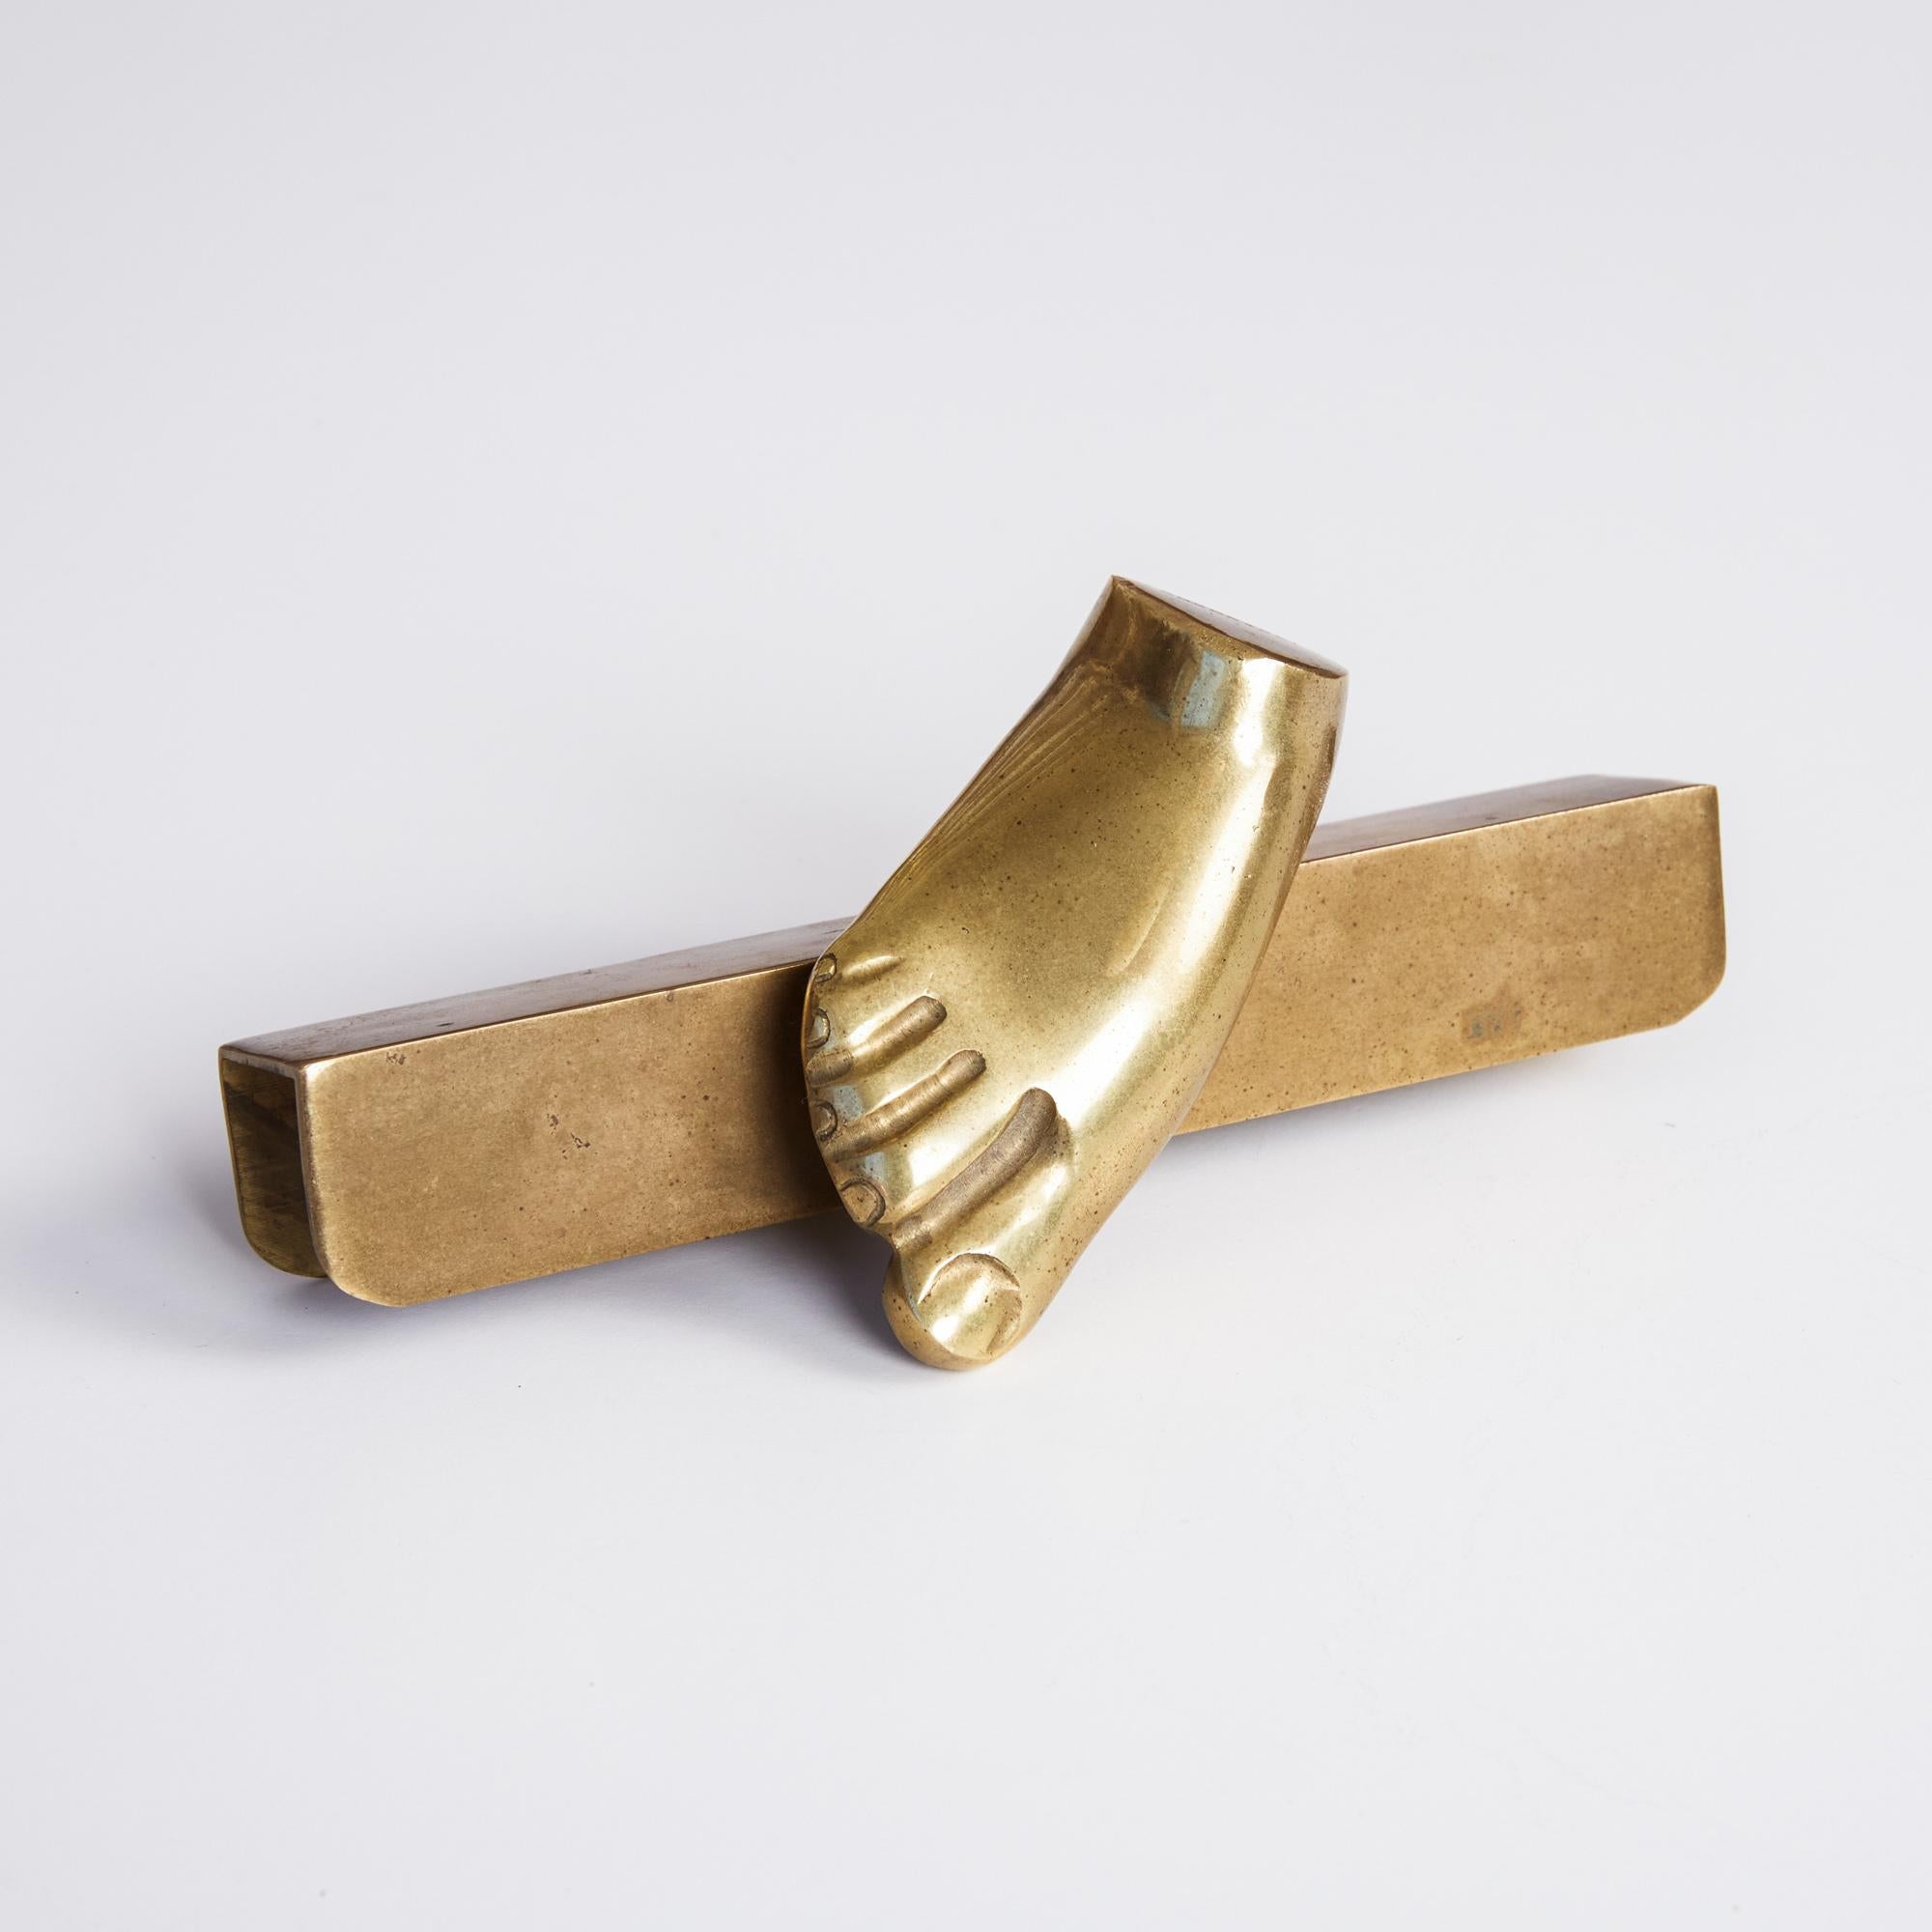 Cast bronze foot by Italian-Brazilian artist Pietrina Checcacci. The small weighted object features a bronze foot attached to a bronze mounting plate. This quirky furniture element would be the perfect way to accent a desk or shelf displaying